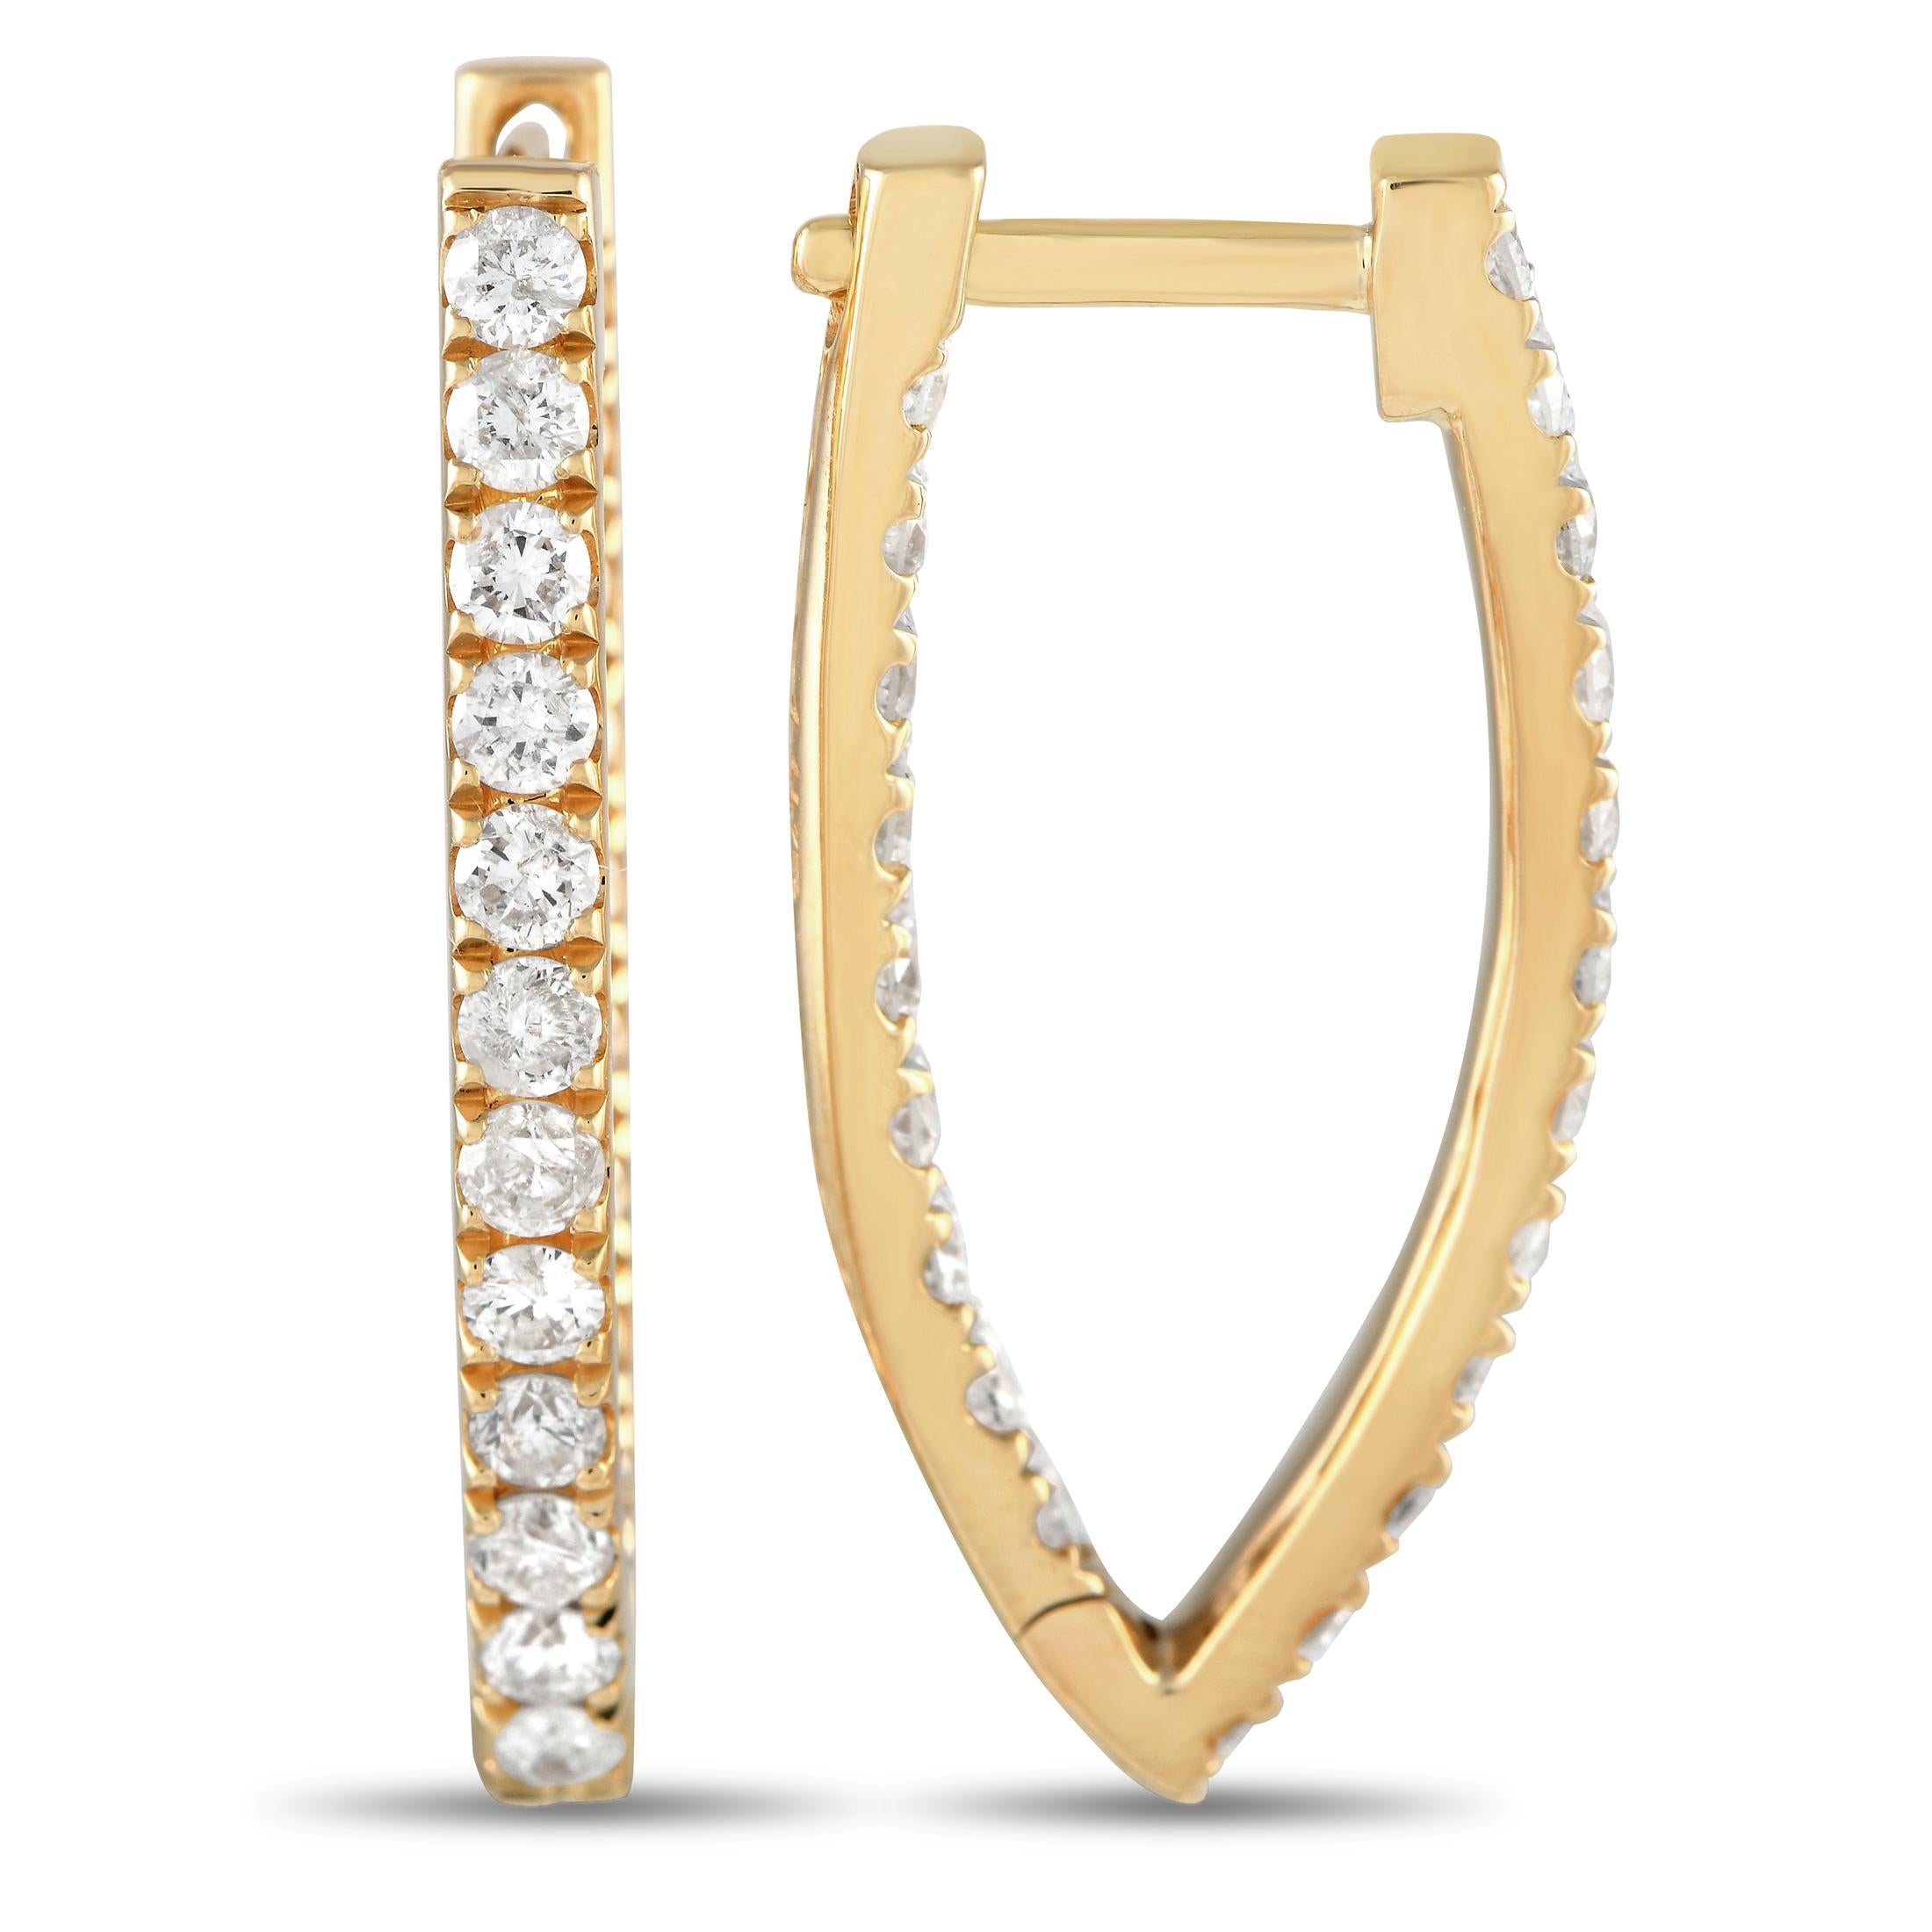 These luxurious 14K yellow gold earrings will continually catch the light thanks to sparkling diamonds with a total weight of 1.52 carats. Each one measures 1.0 long by 0.50 wide.This jewelry piece is offered in brand new condition and includes a